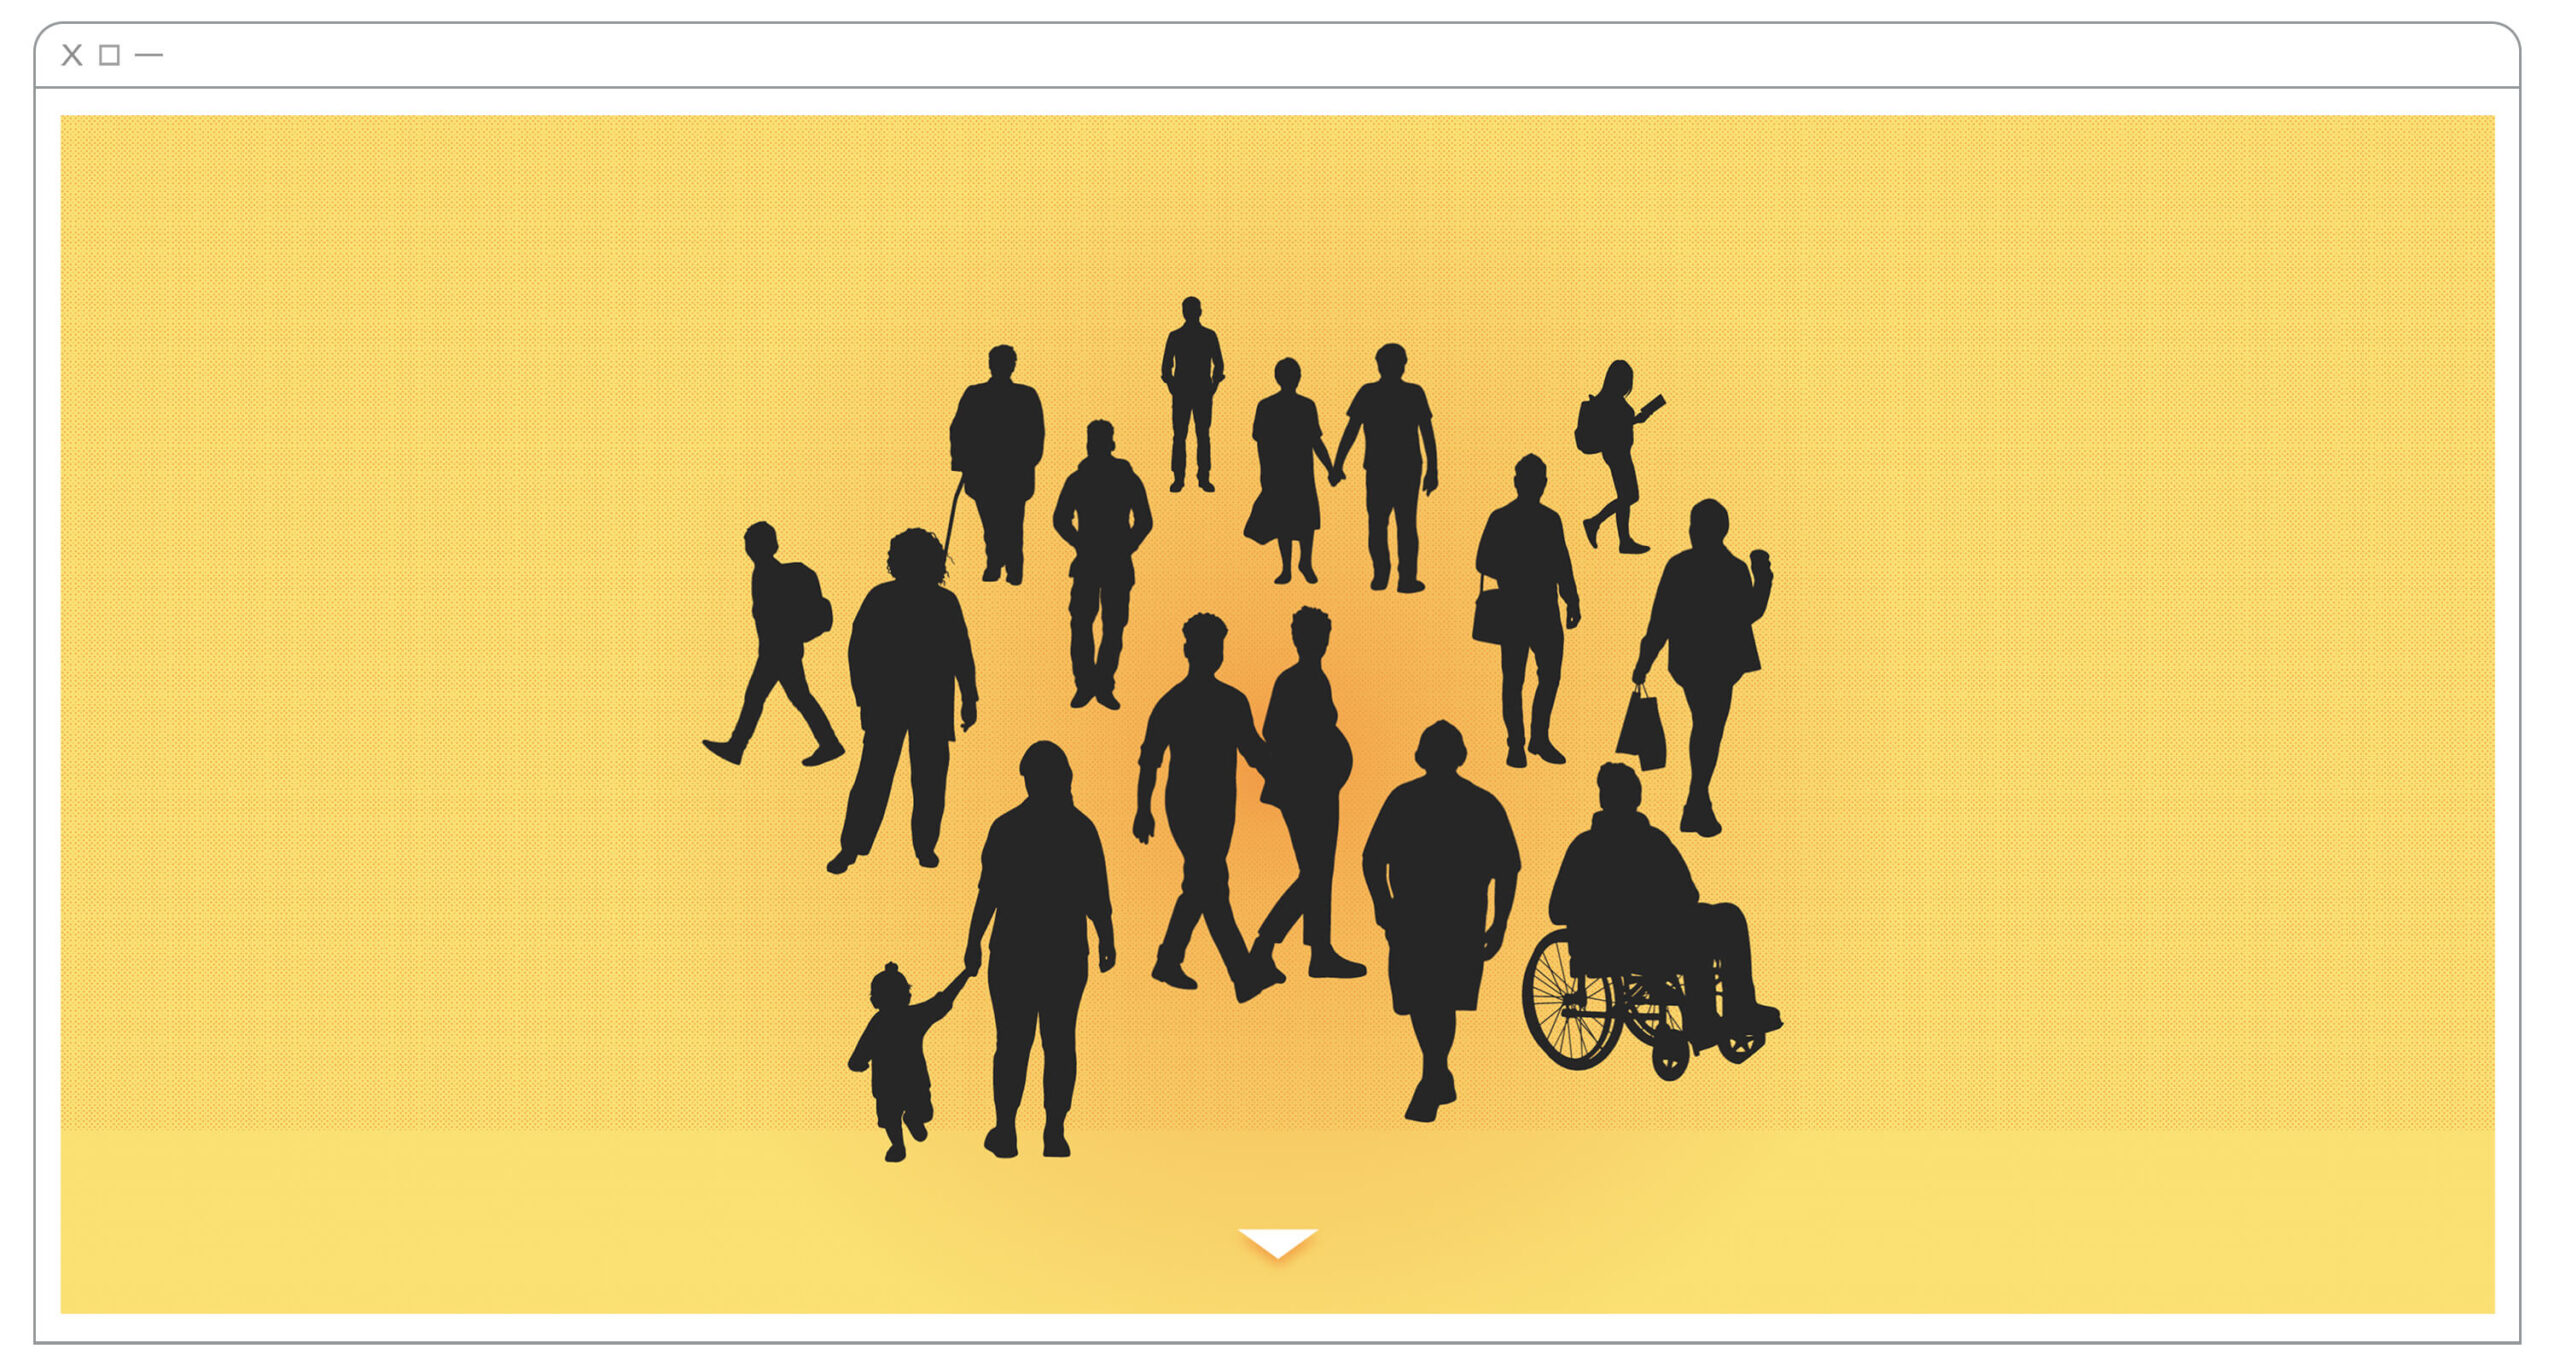 15 people are represented in the form of black silhouettes grouped on a yellow background. We can guess, among others, a young schoolboy, several elderly people, two couples, a pregnant woman, a man in a wheelchair, a young child and several people at work or at school.